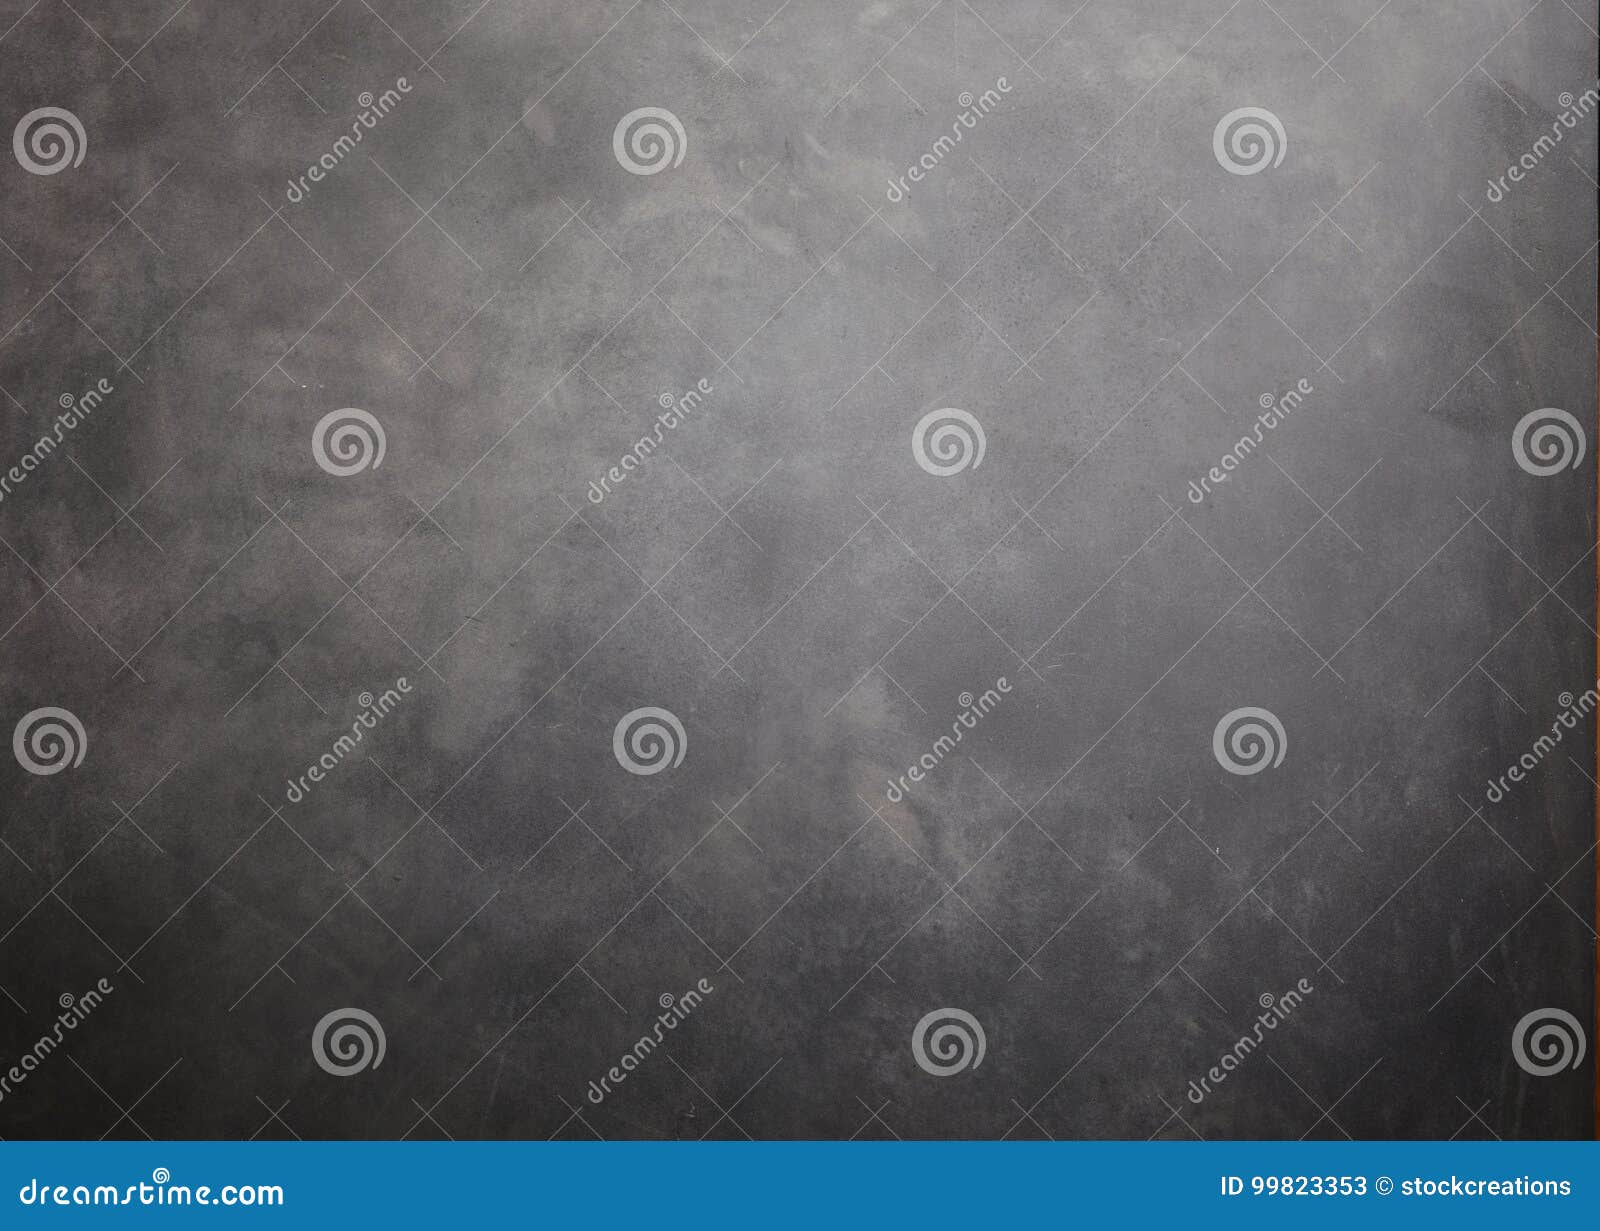 rustic dark grey background with copy space